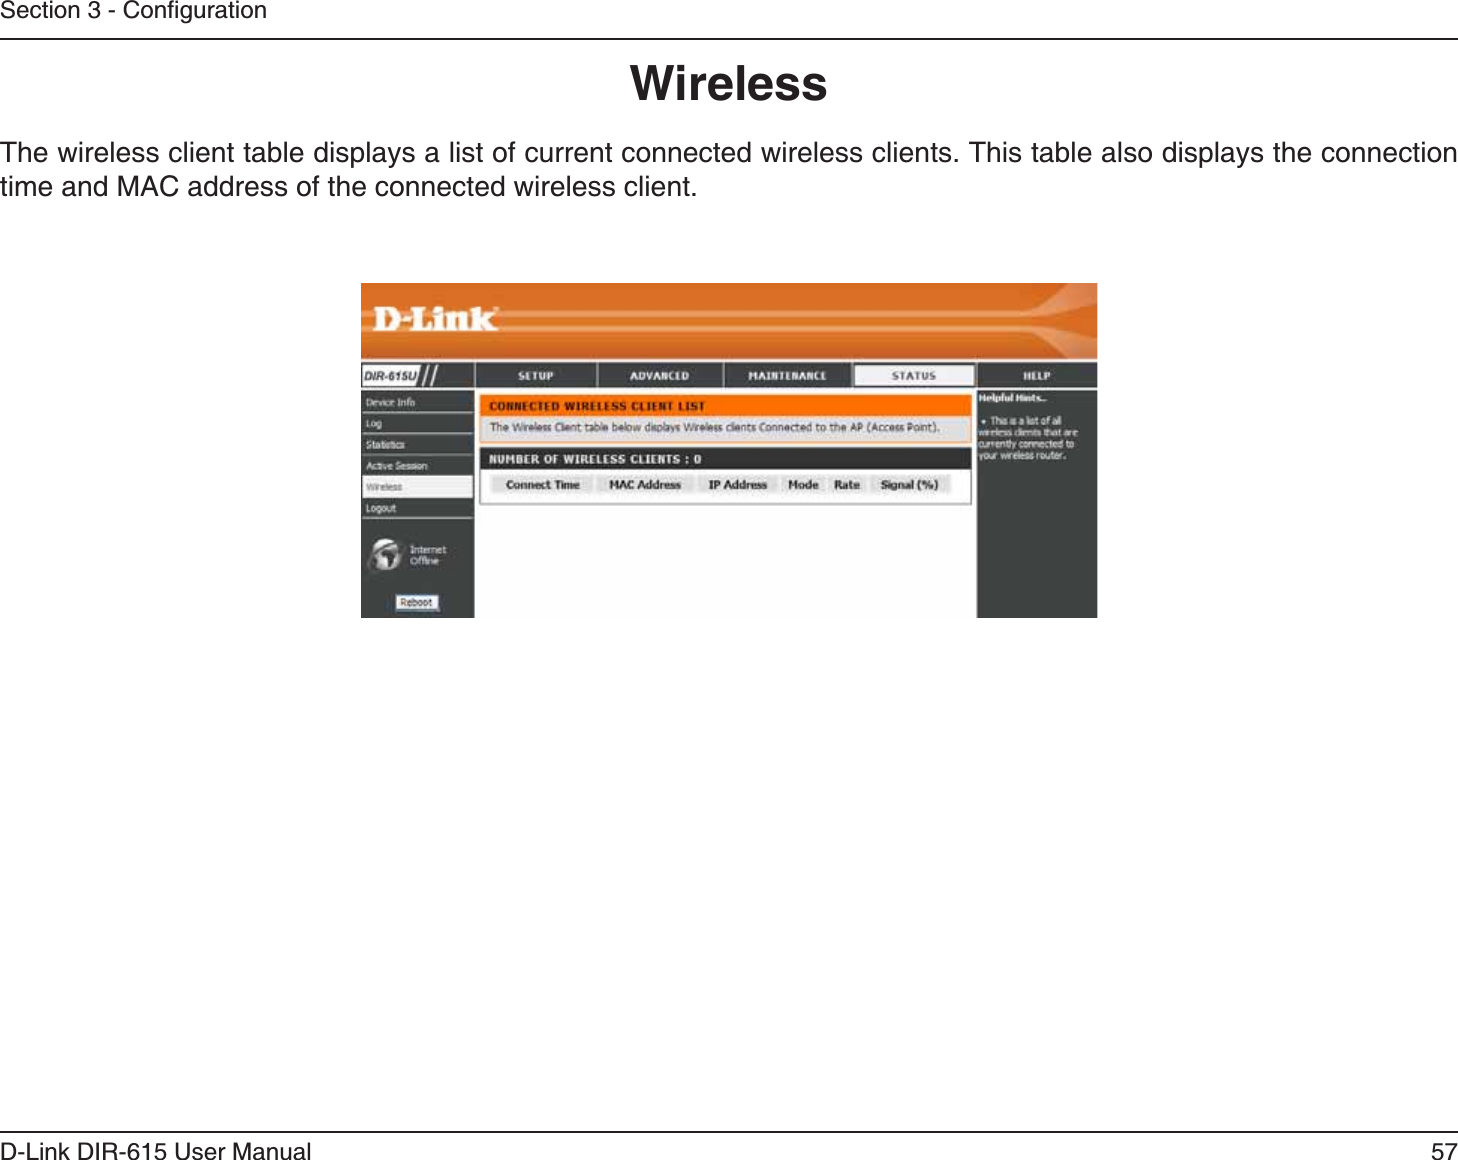 57D-Link DIR-615 User Manual5GEVKQP%QPſIWTCVKQP9KTGNGUUThe wireless client table displays a list of current connected wireless clients. This table also displays the connection time and MAC address of the connected wireless client.